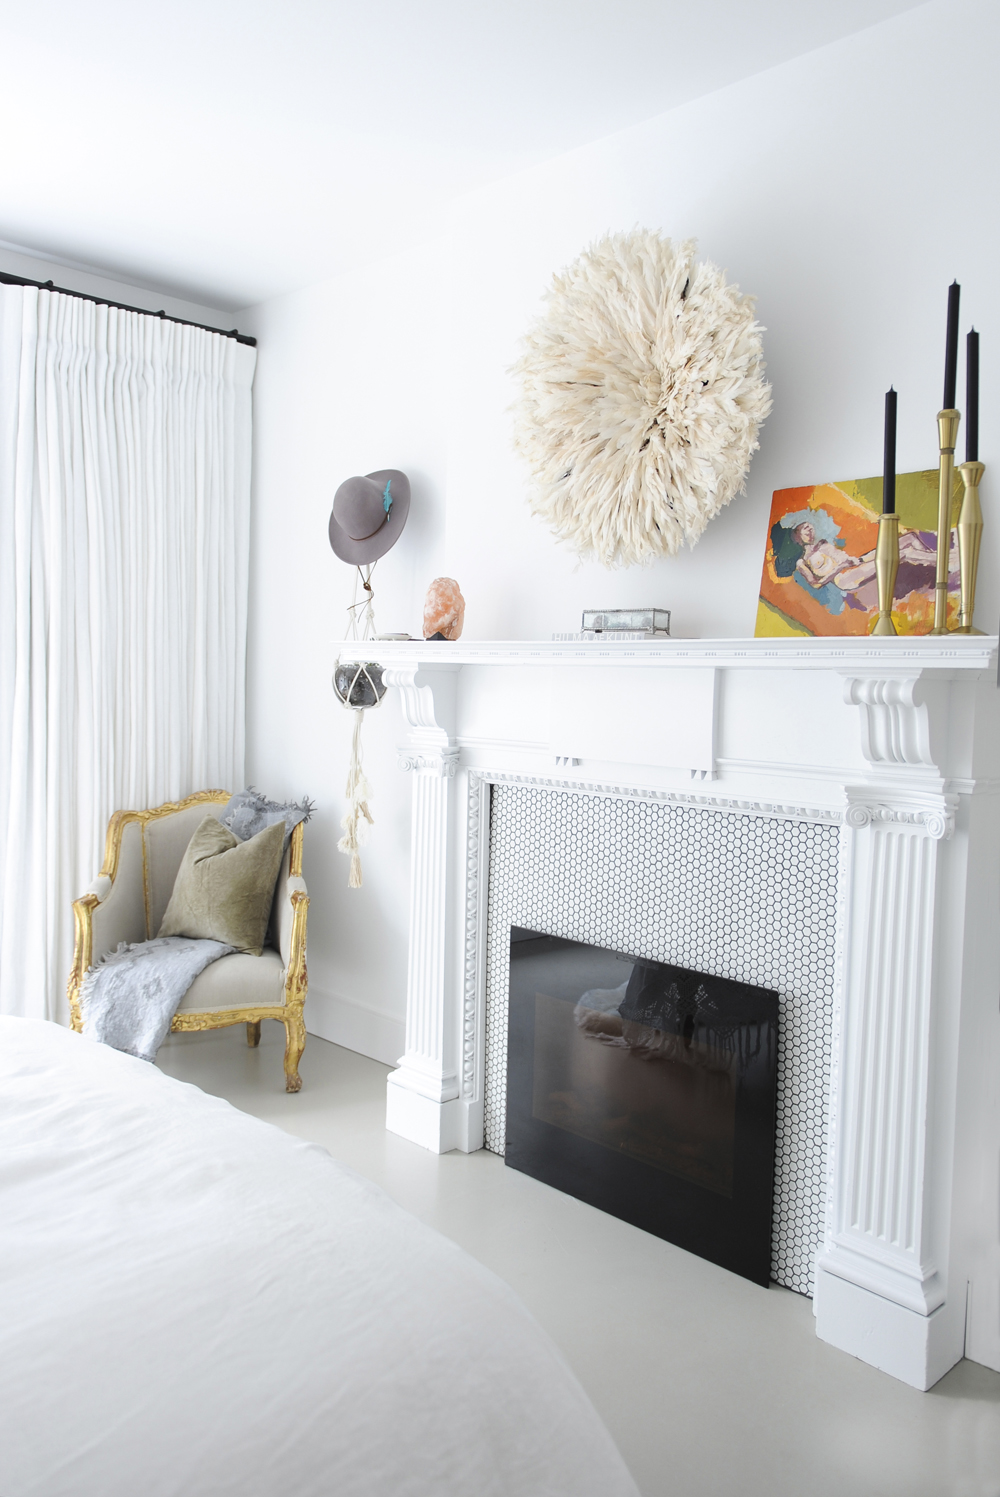 white bedroom with fireplace with mosaic tiles and feather juju above it, gold frame chair in corner